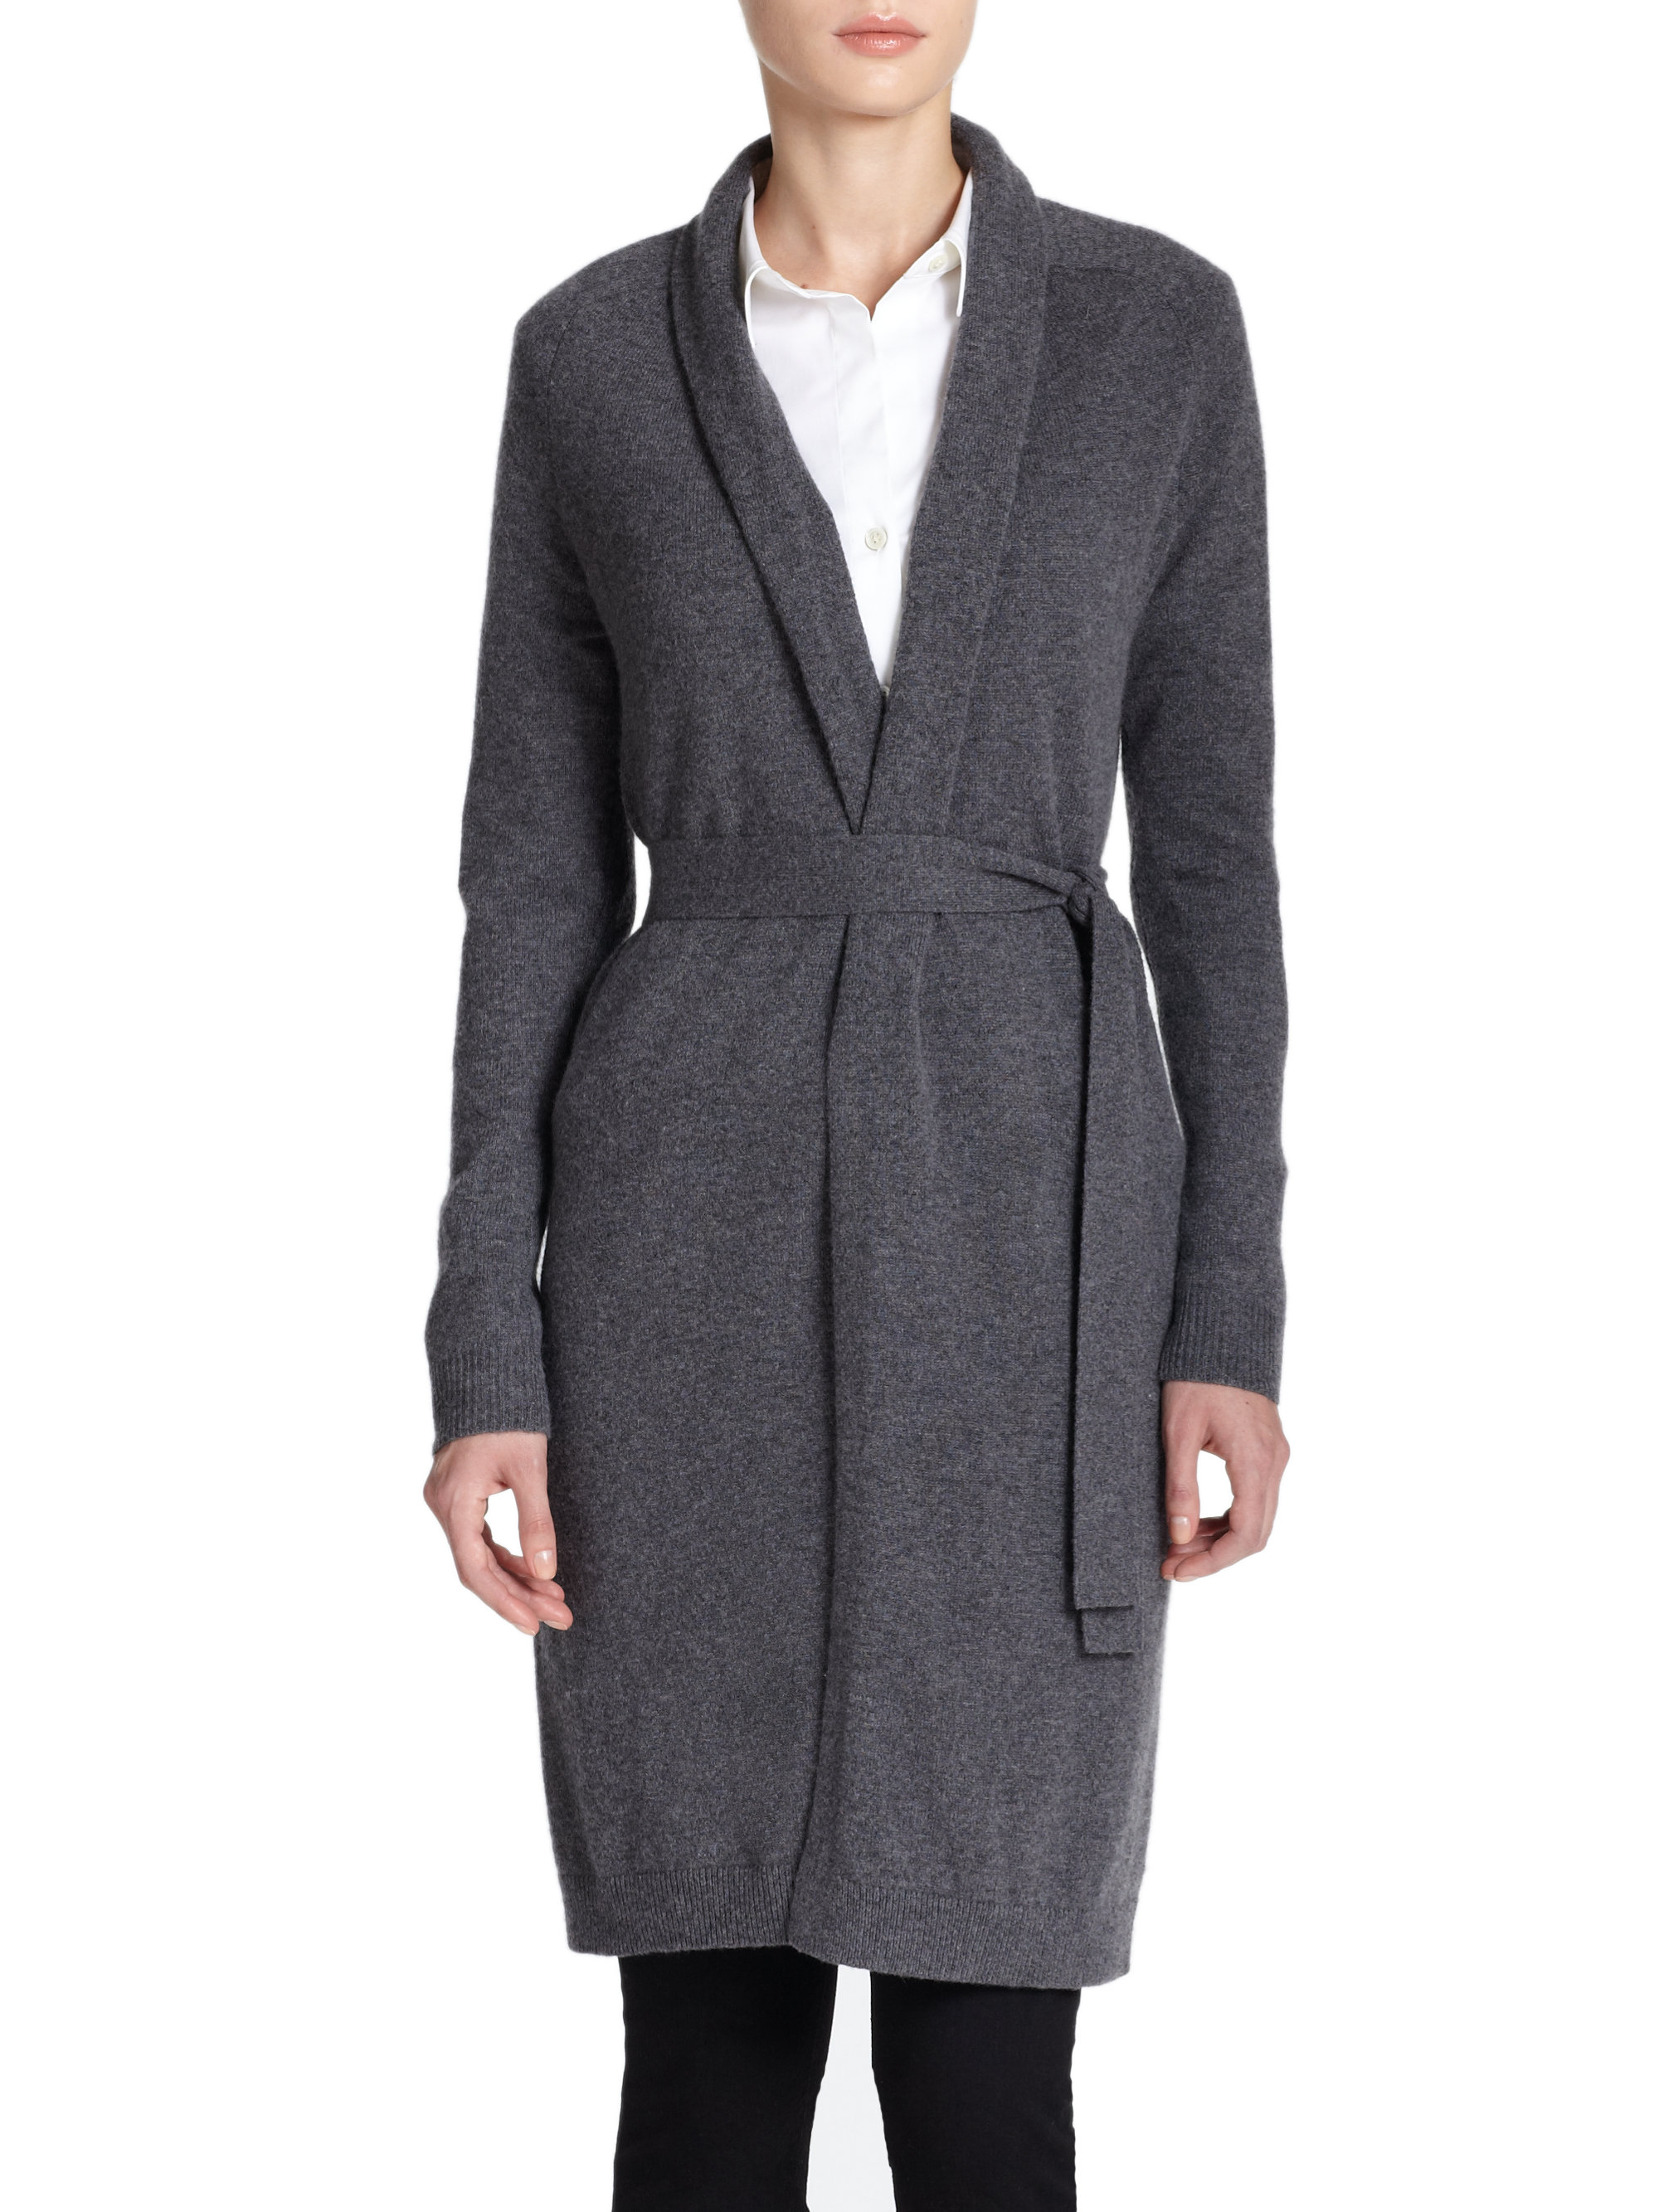 Theory Ashtry Cashmere Wrap Cardigan Sweater in Gray - Lyst